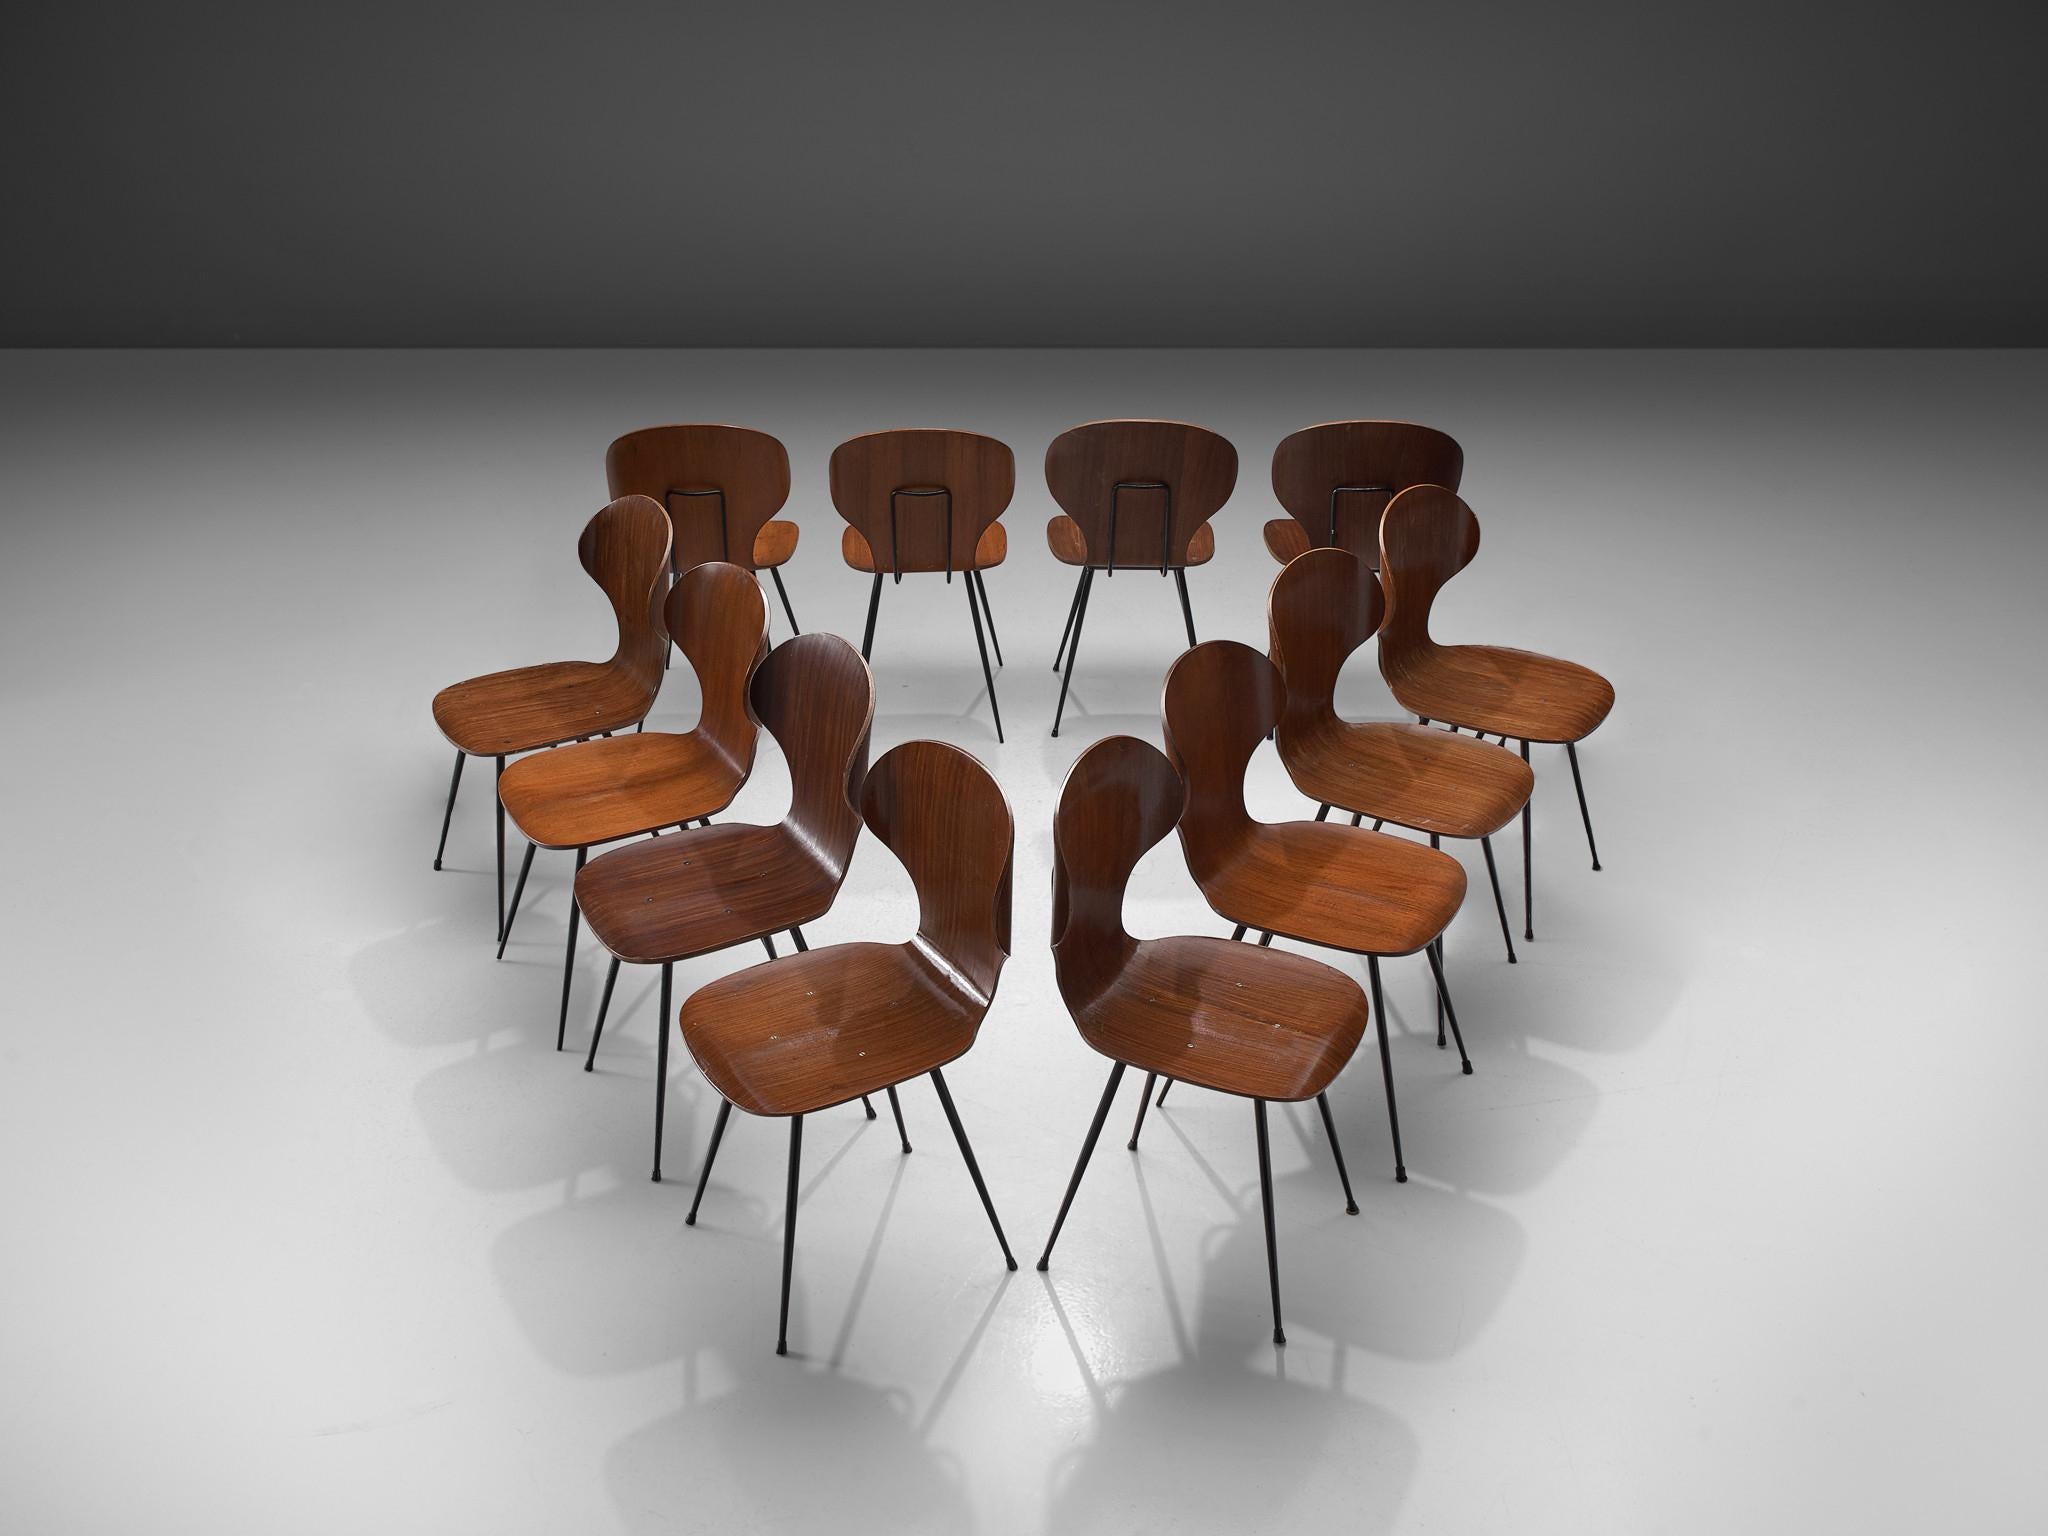 Carlo Ratti for Industria Legni Curvati, set of twelve dining chairs, plywood with a teak fineer and metal, Italy, 1970s.

Elegant set of Italian dining chairs with metal frame and plywood seats. The seat features a wingback with remarkable curves.